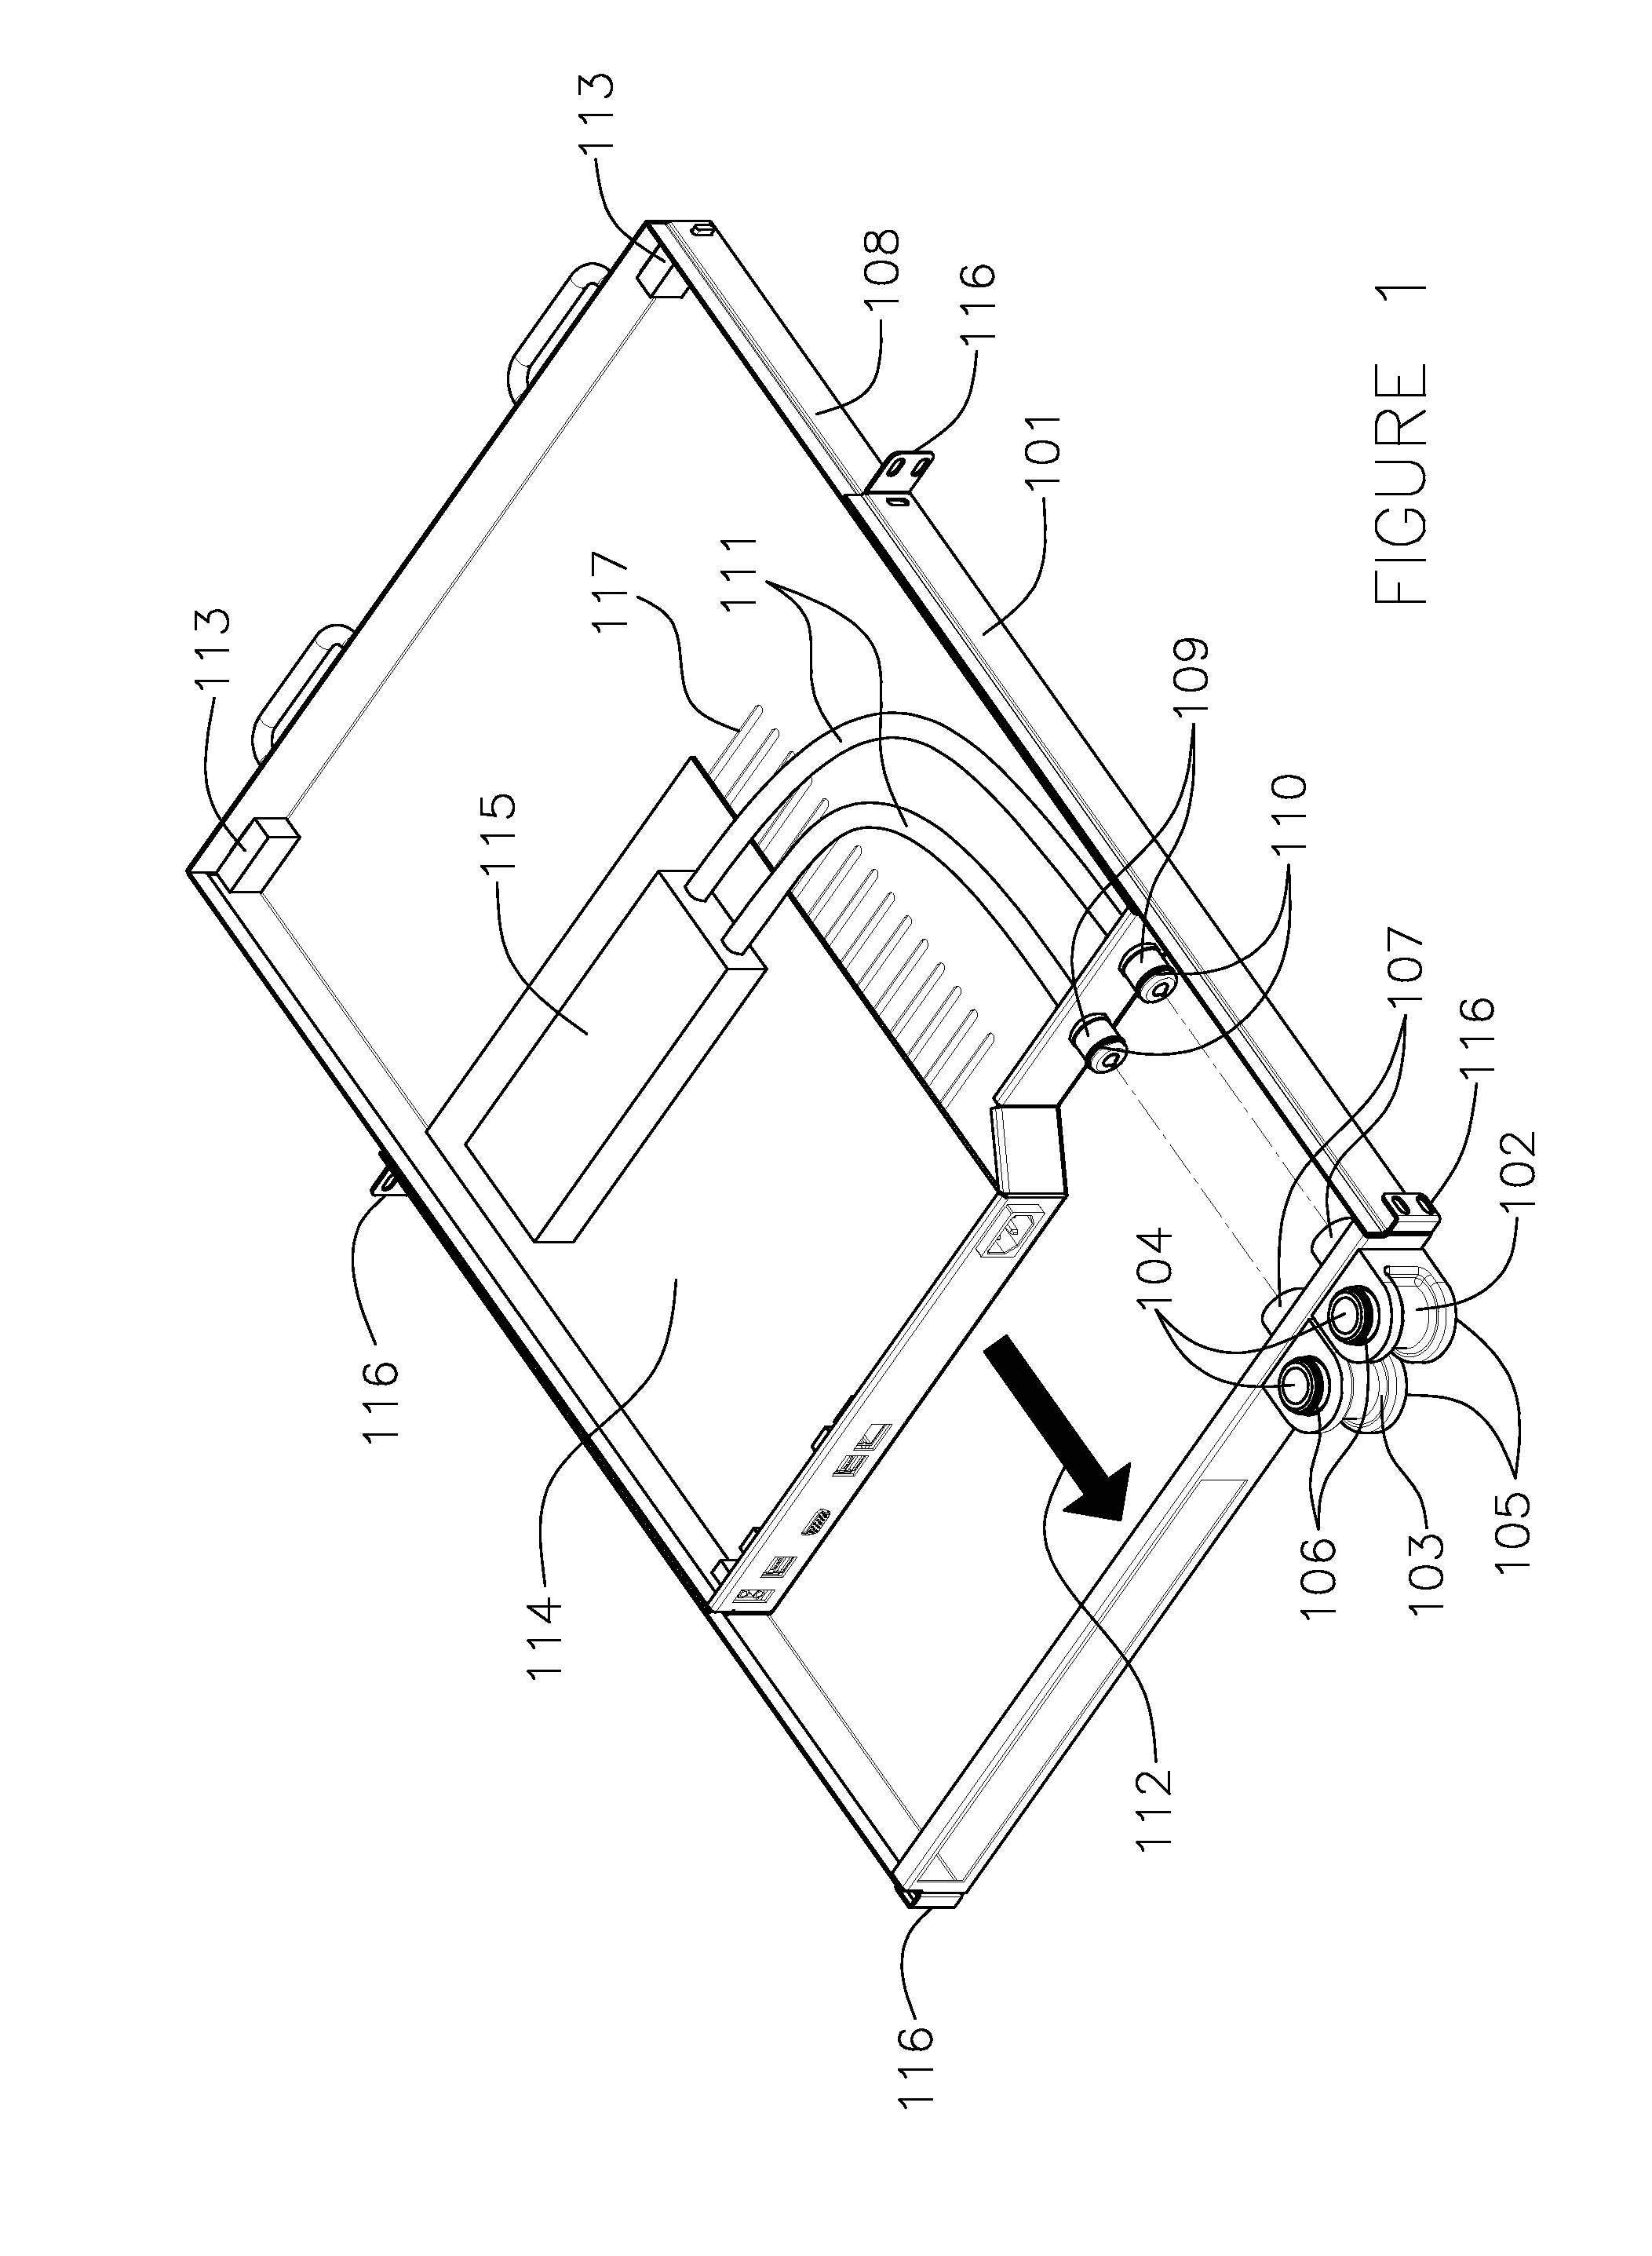 System and method for flowing fluids through electronic chassis modules